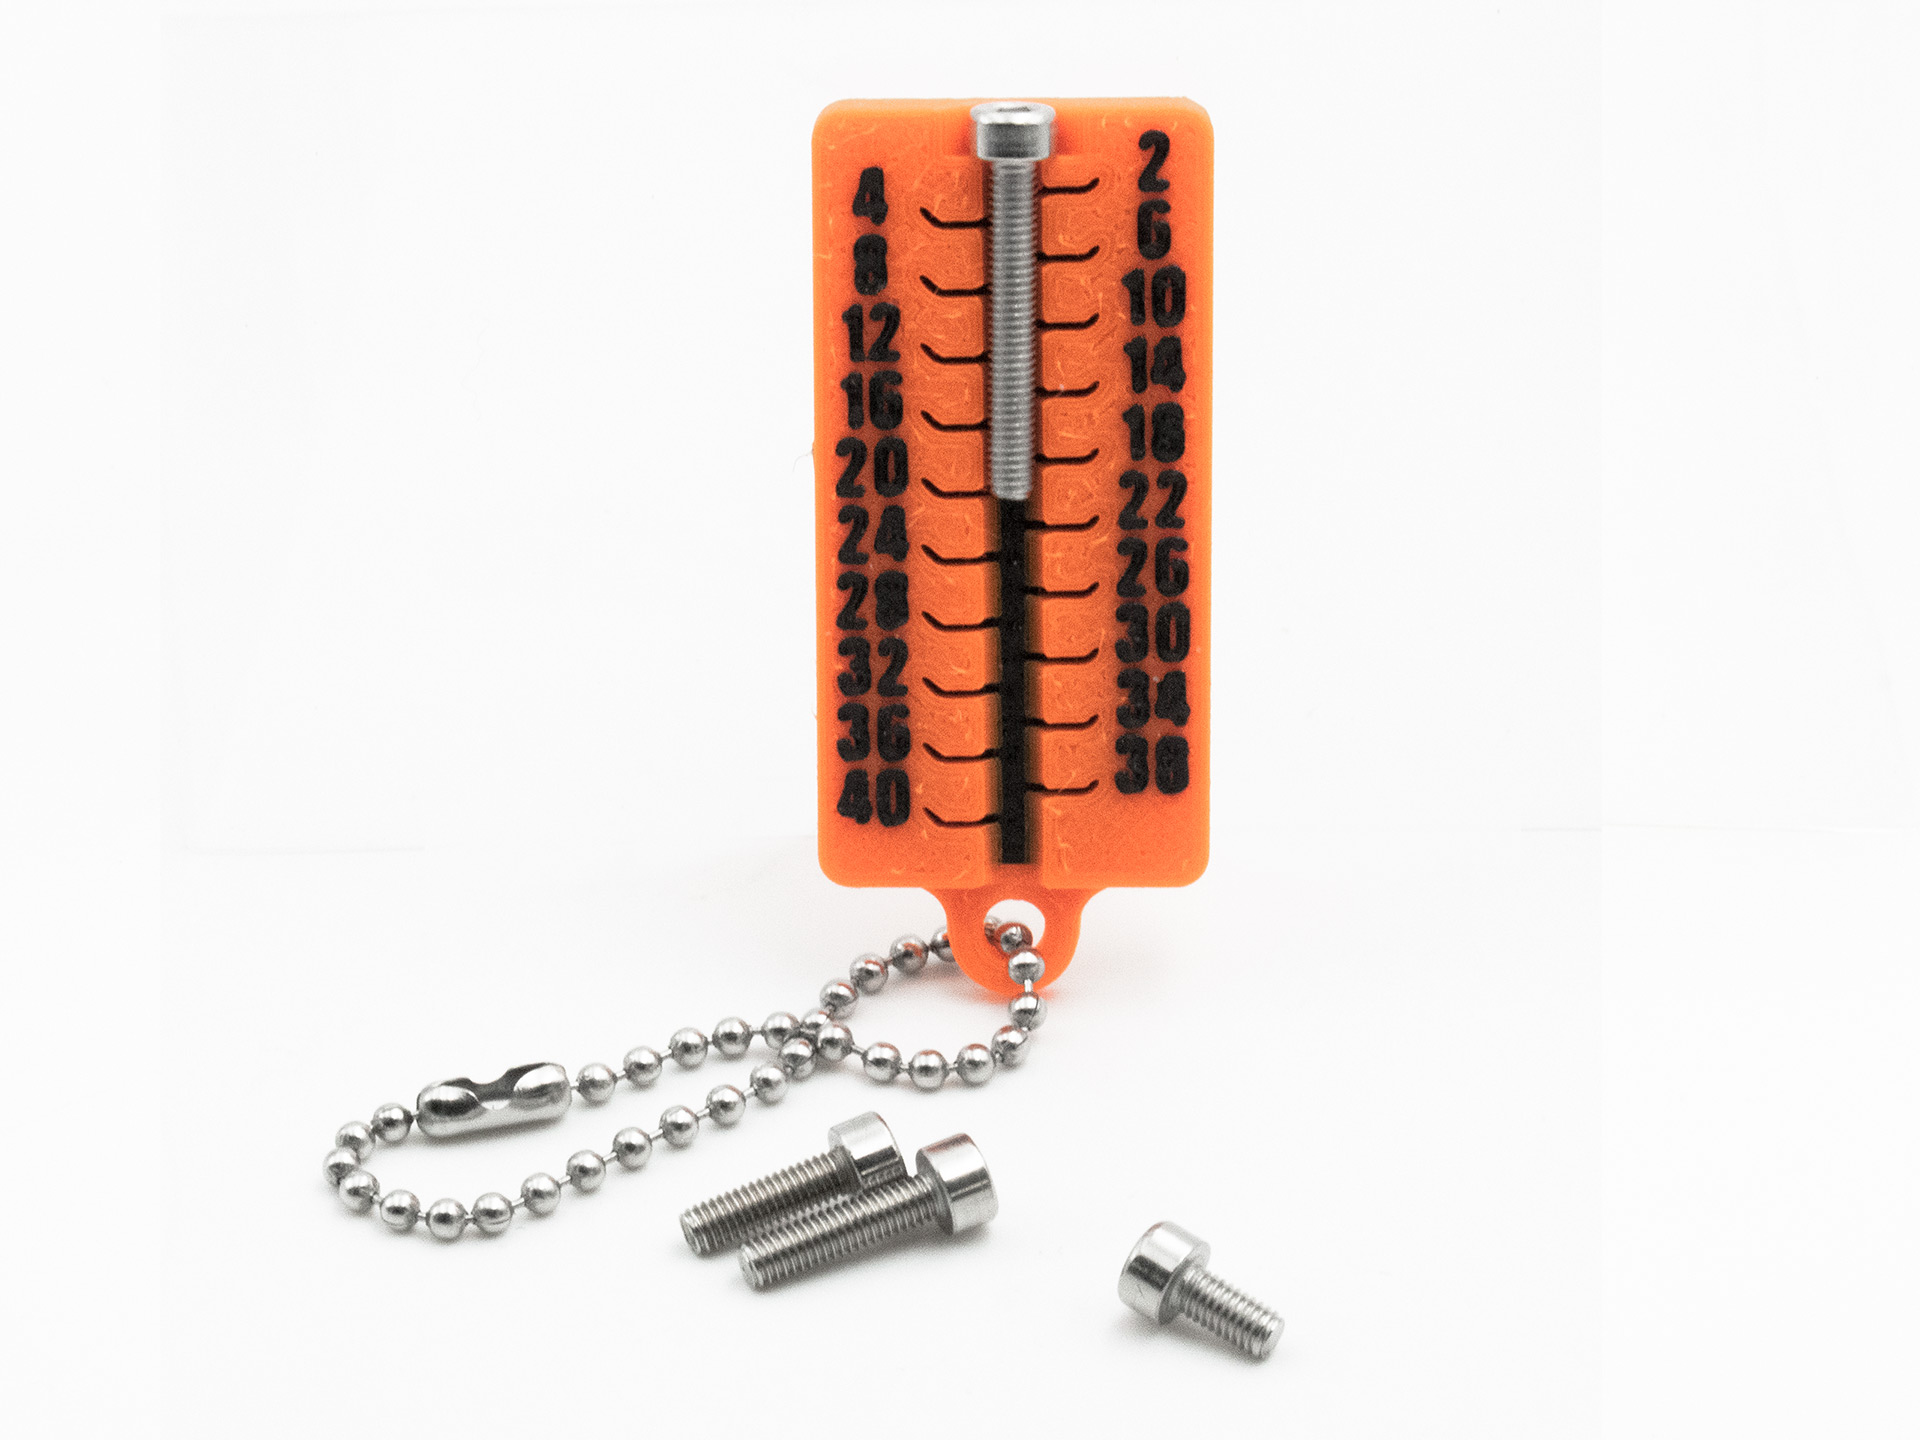 Compact M3 Tool - Quickly Measure Prusa M3 Screw Lengths